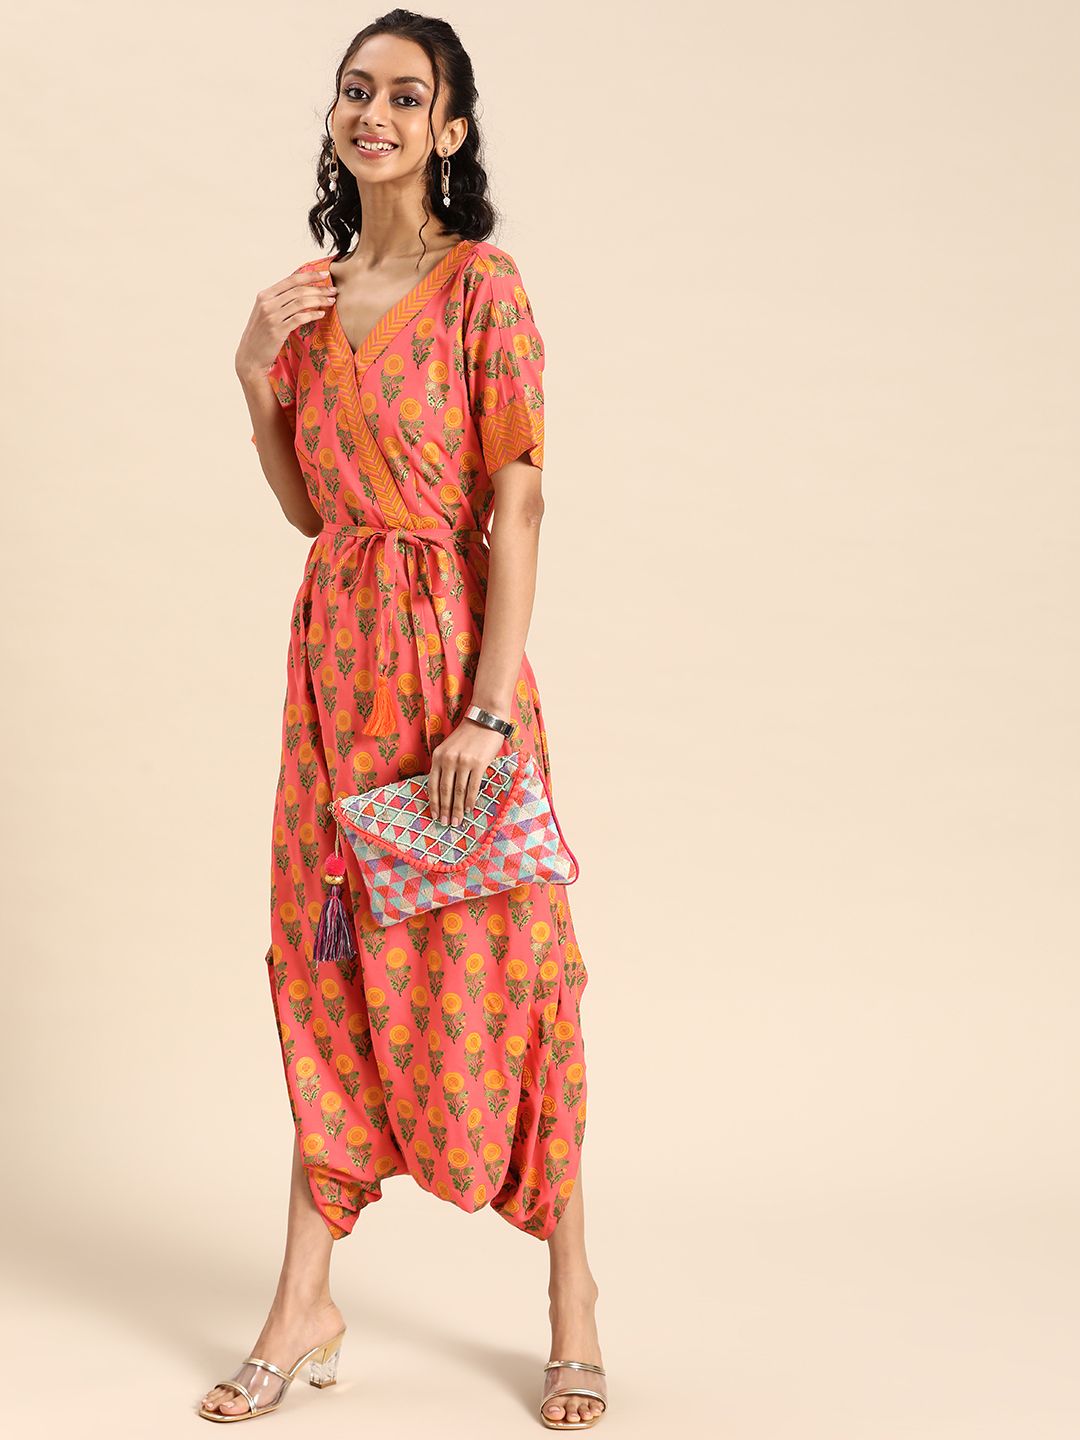 MABISH by Sonal Jain Peach-Coloured Basic Jumpsuit Price in India